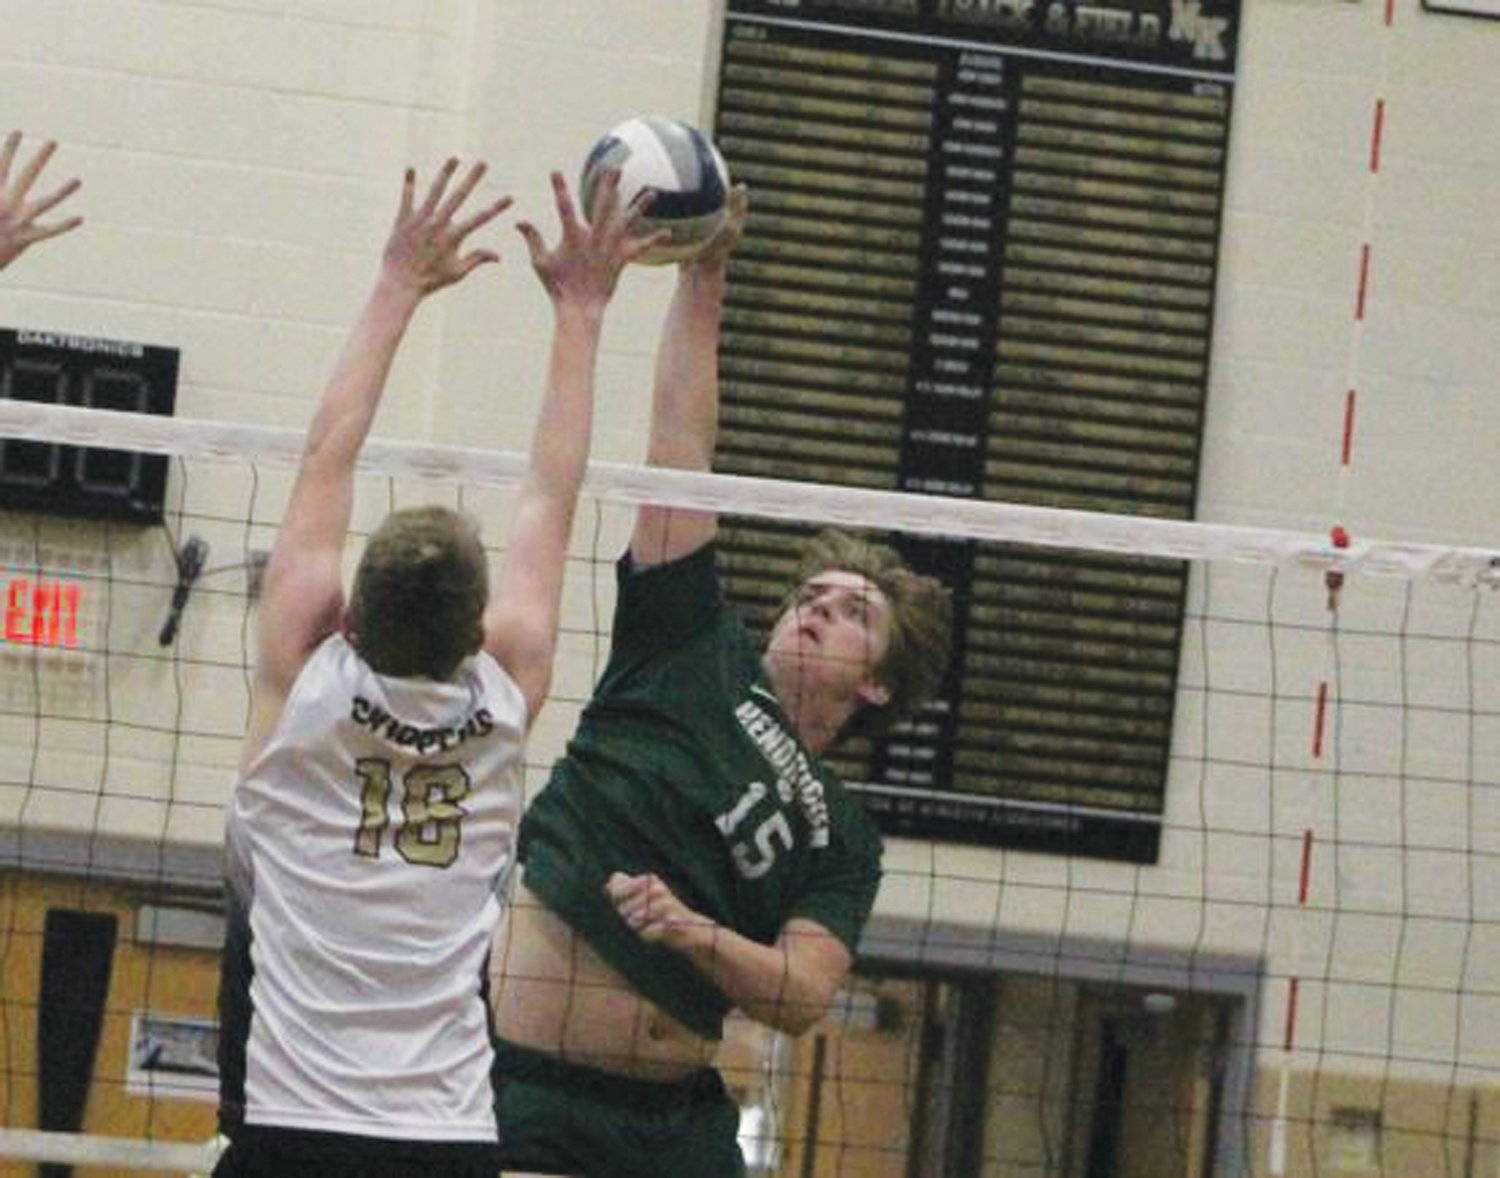 AT THE NET: Hendricken’s Ryan Osley goes for a shot.